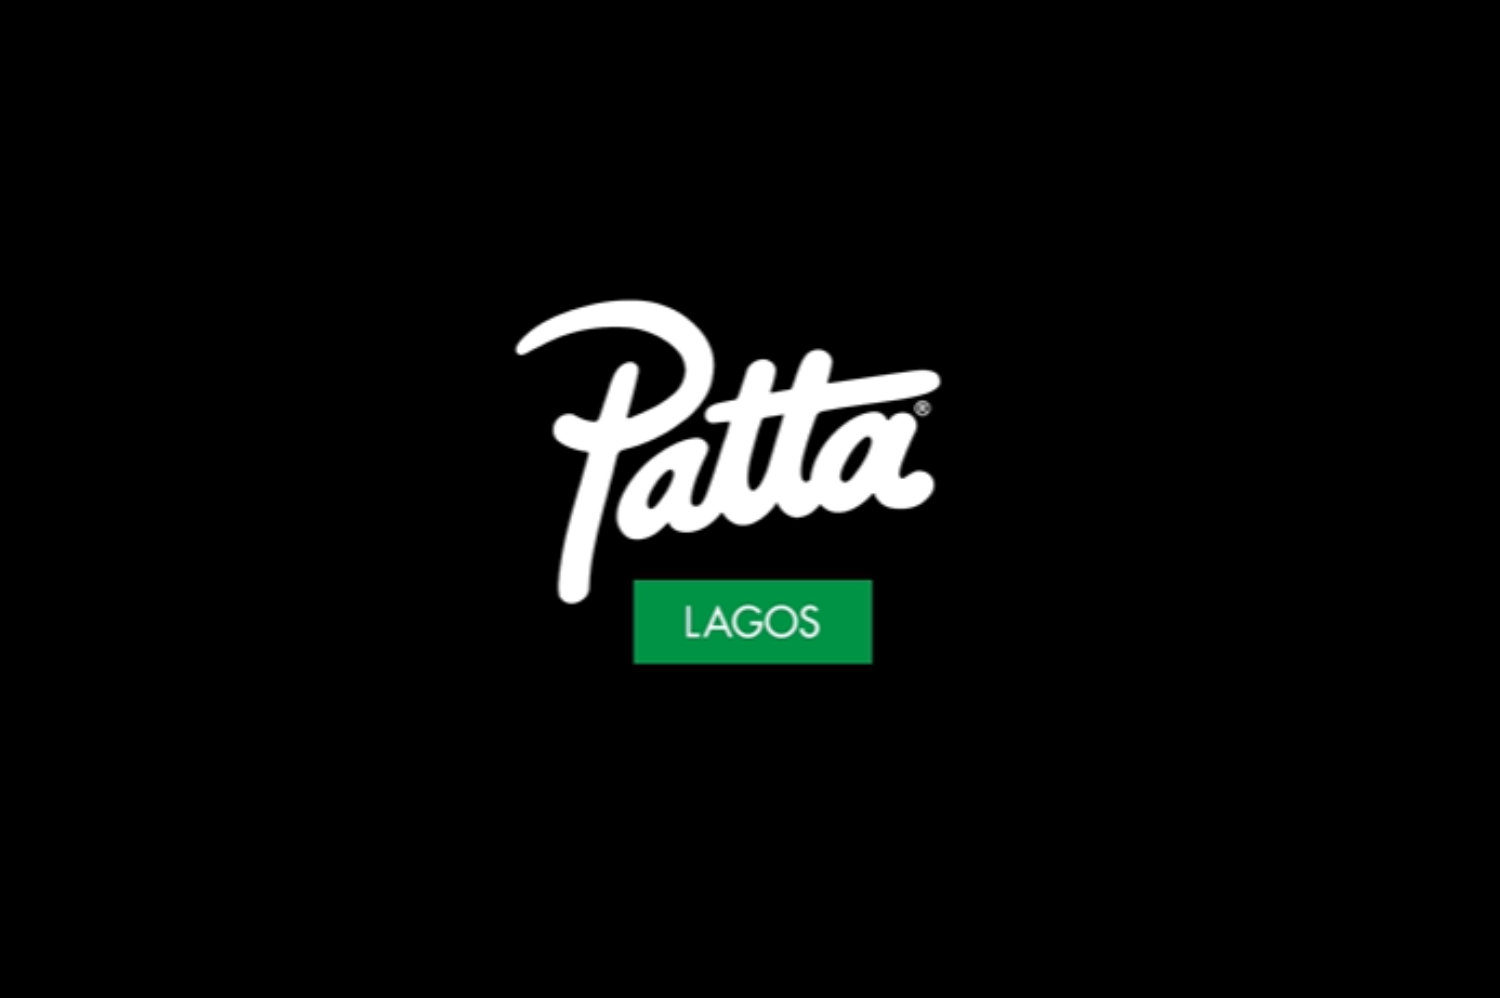 Patta opens flagshipstore in Lagos